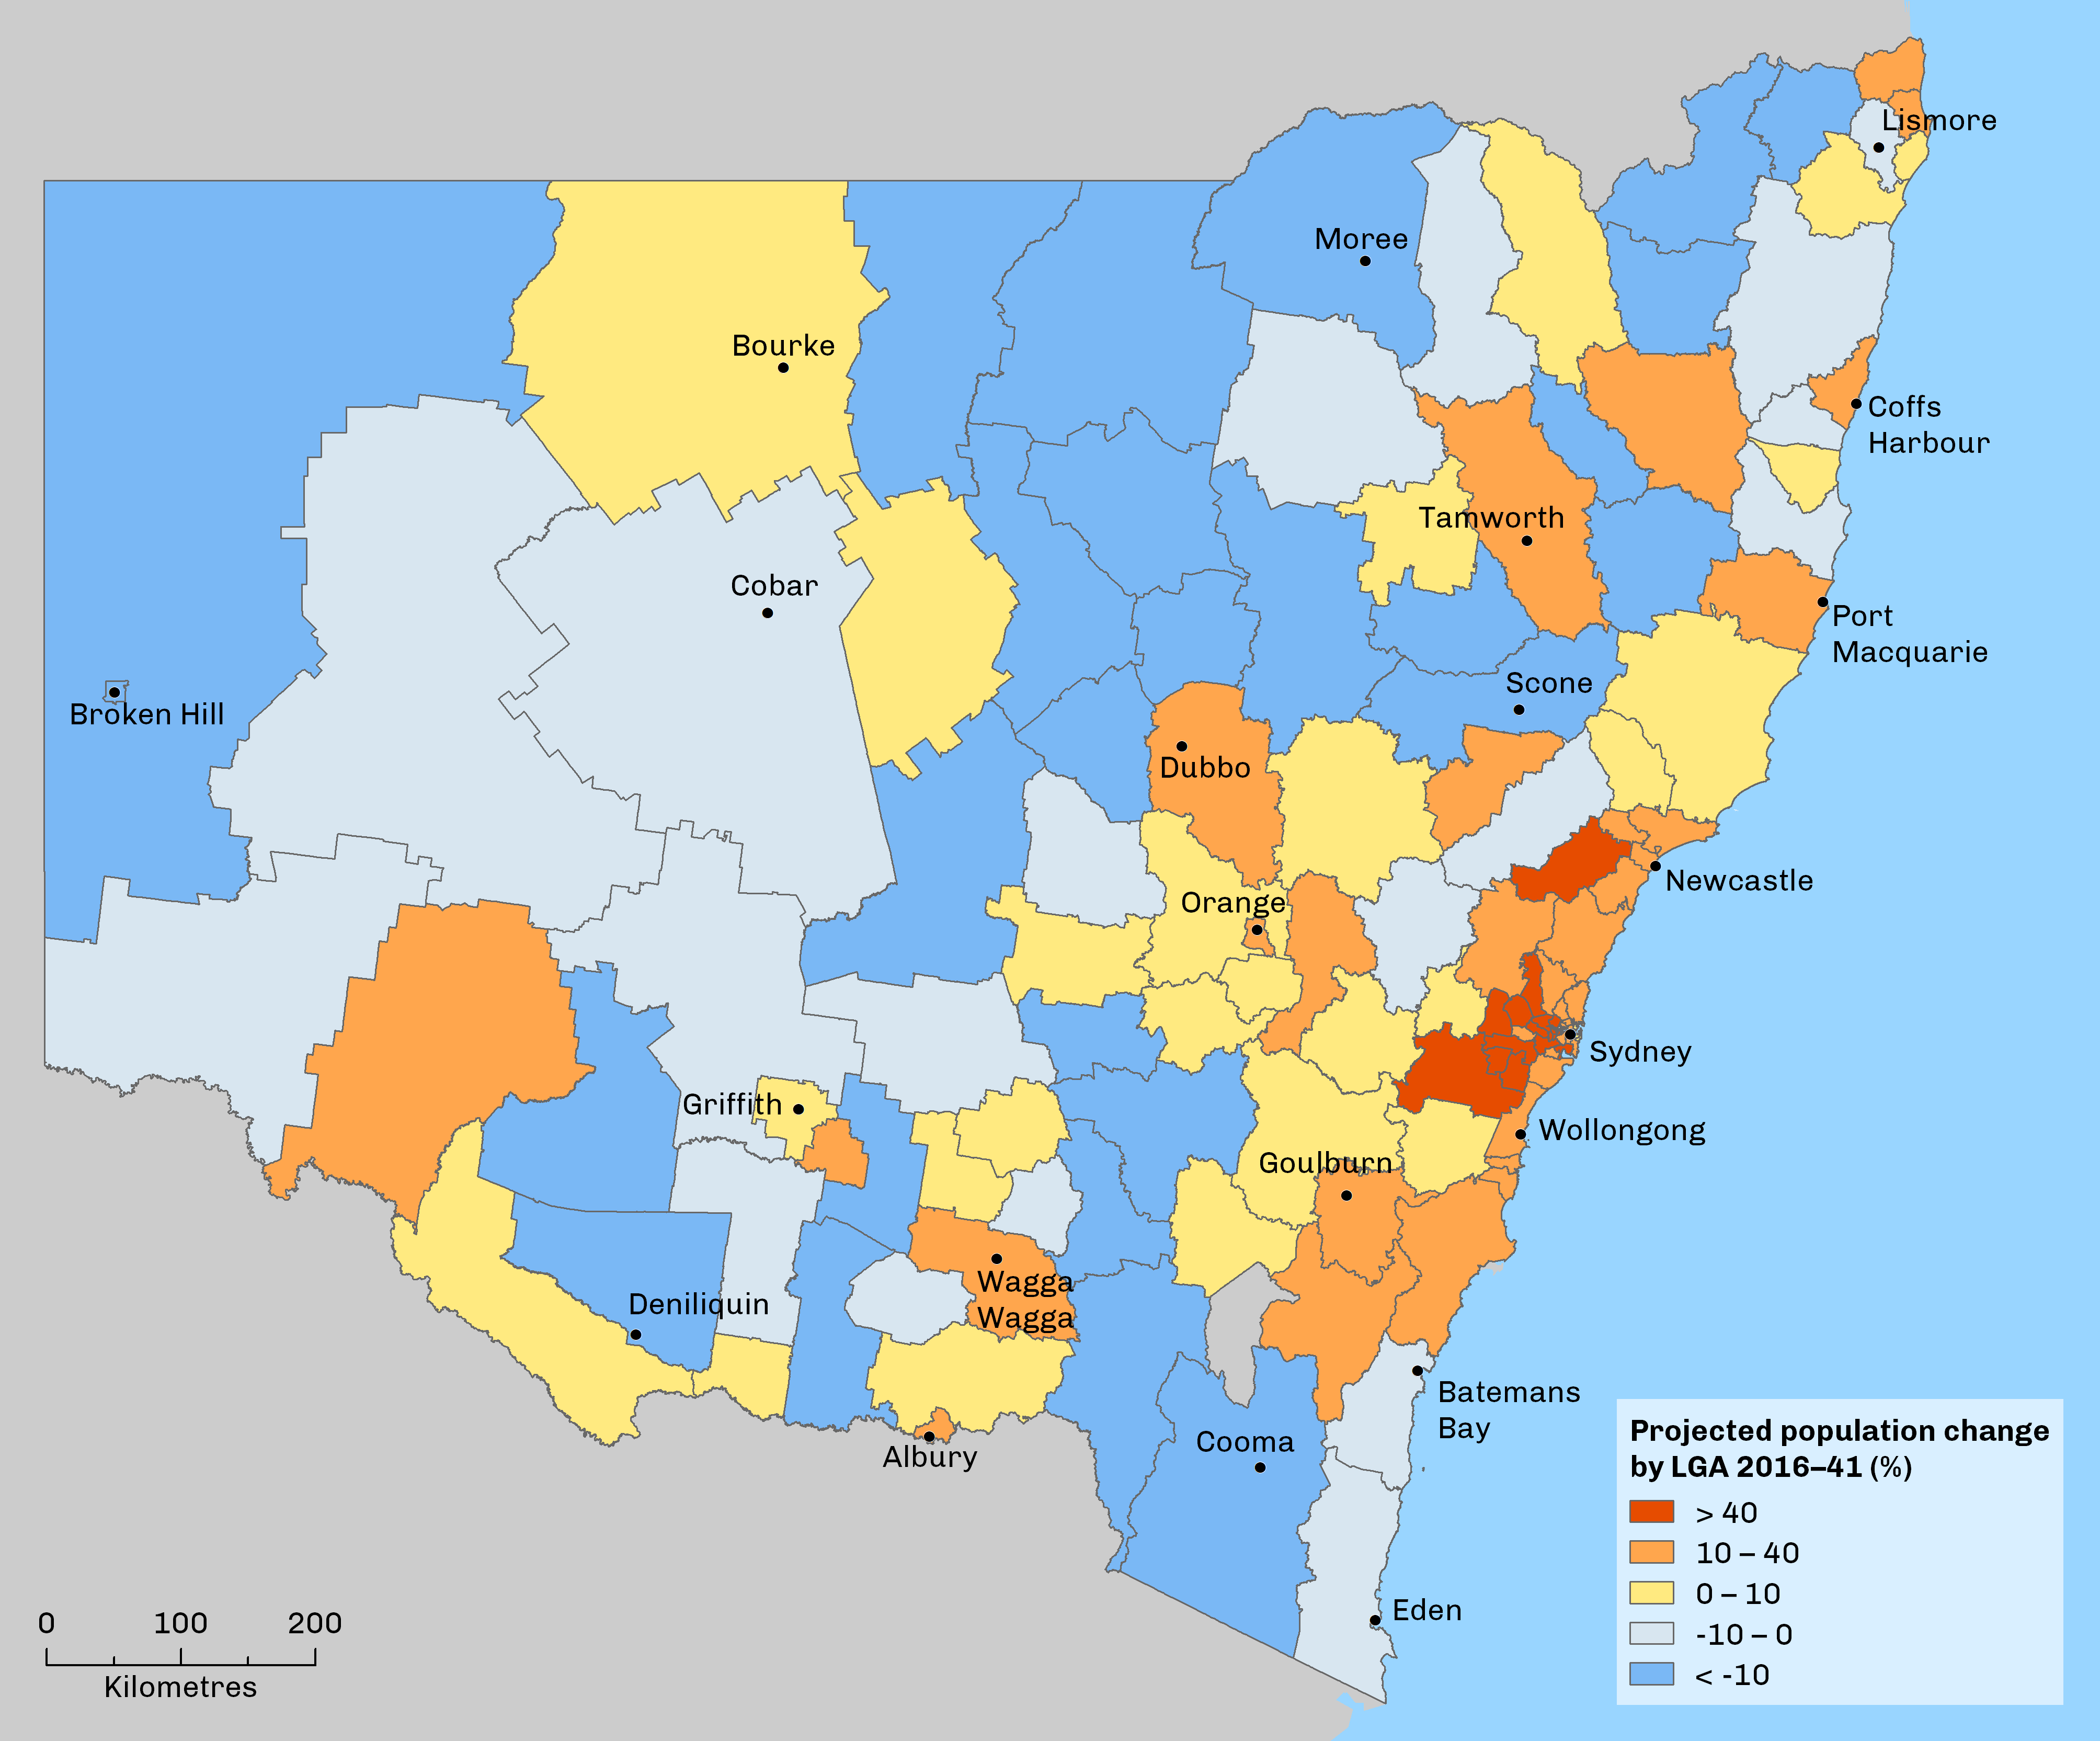 Map showing projected population change for each local government area, with most growth occurring in north west and south west Sydney regions, and least change occurring in central and western NSW